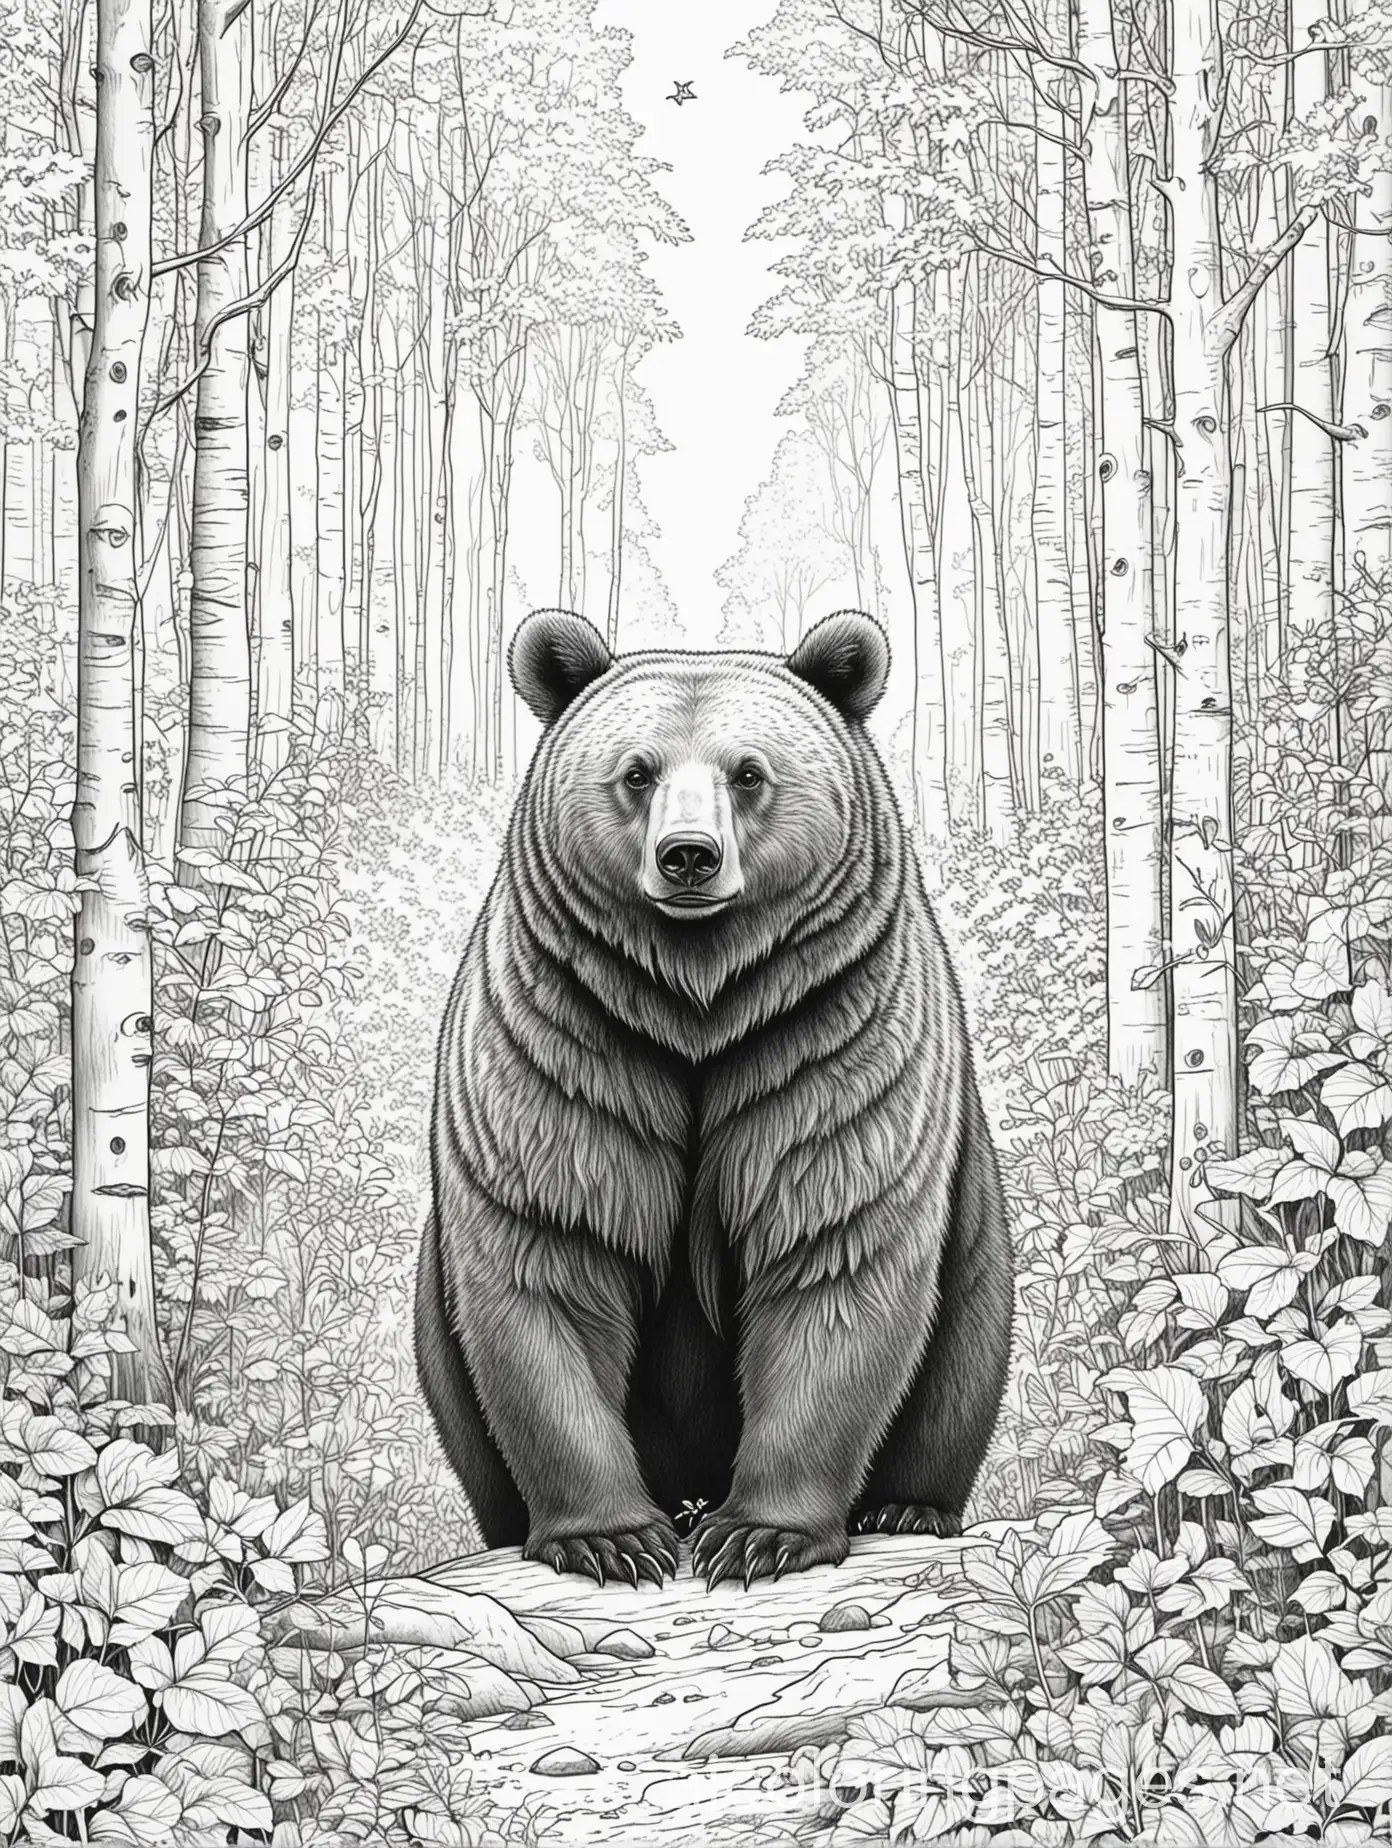 Bear-in-the-Woods-Coloring-Page-Simplistic-Line-Art-on-White-Background